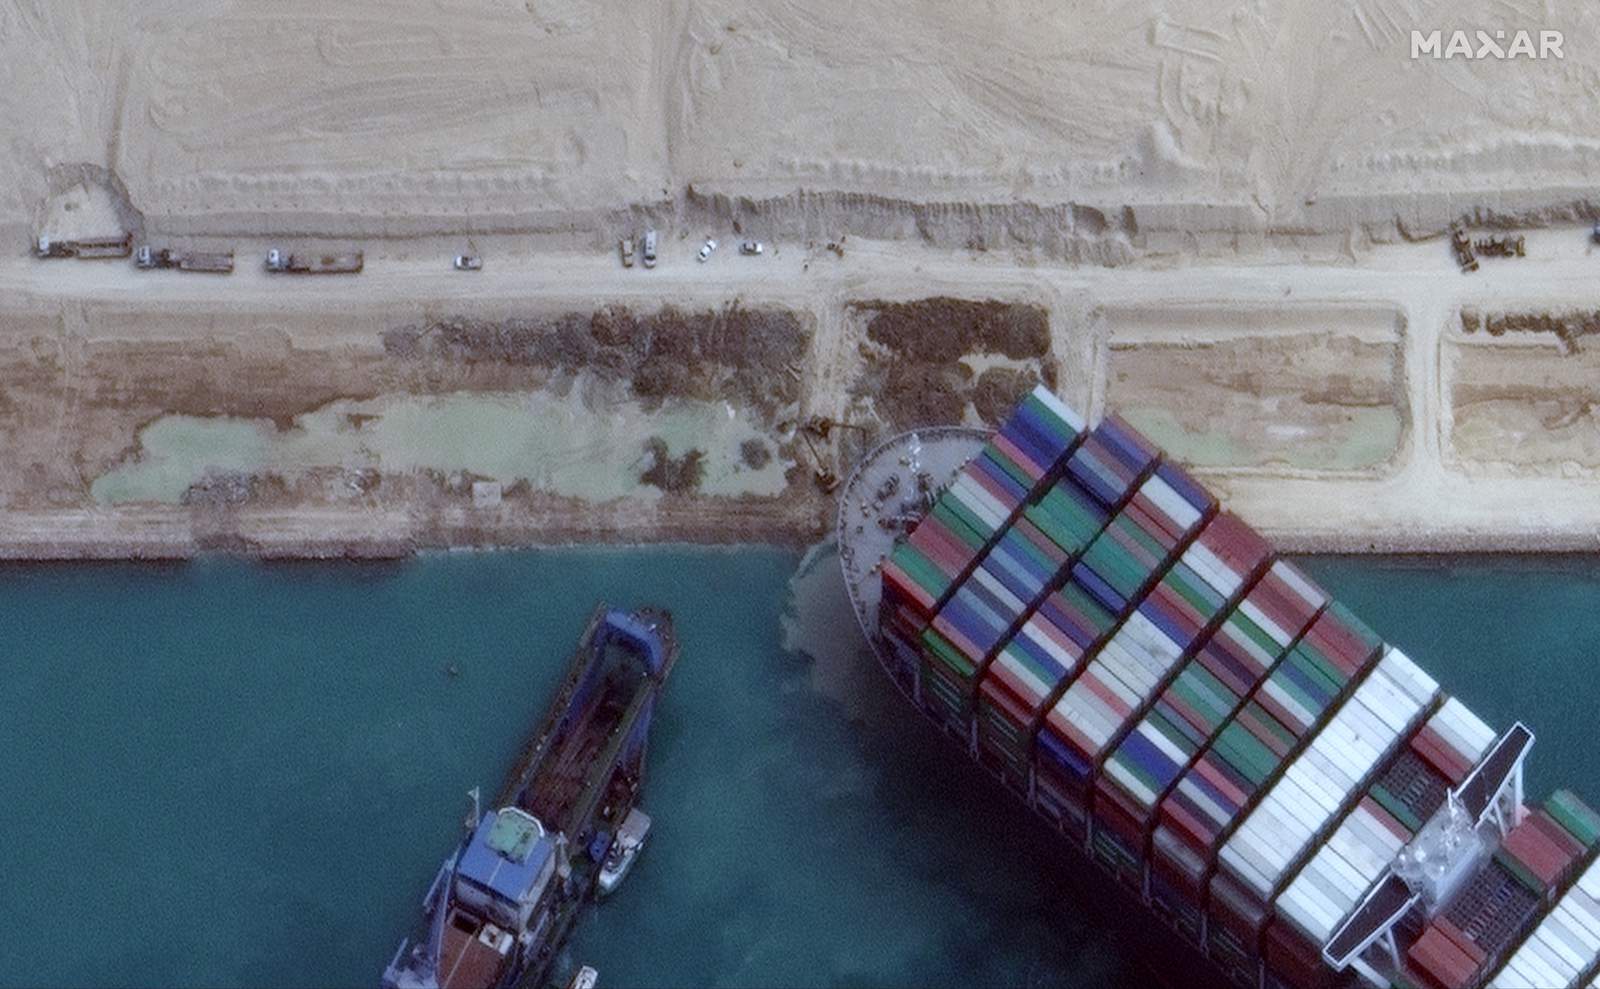 Suez Canal blockage adds to pressure points in global trade